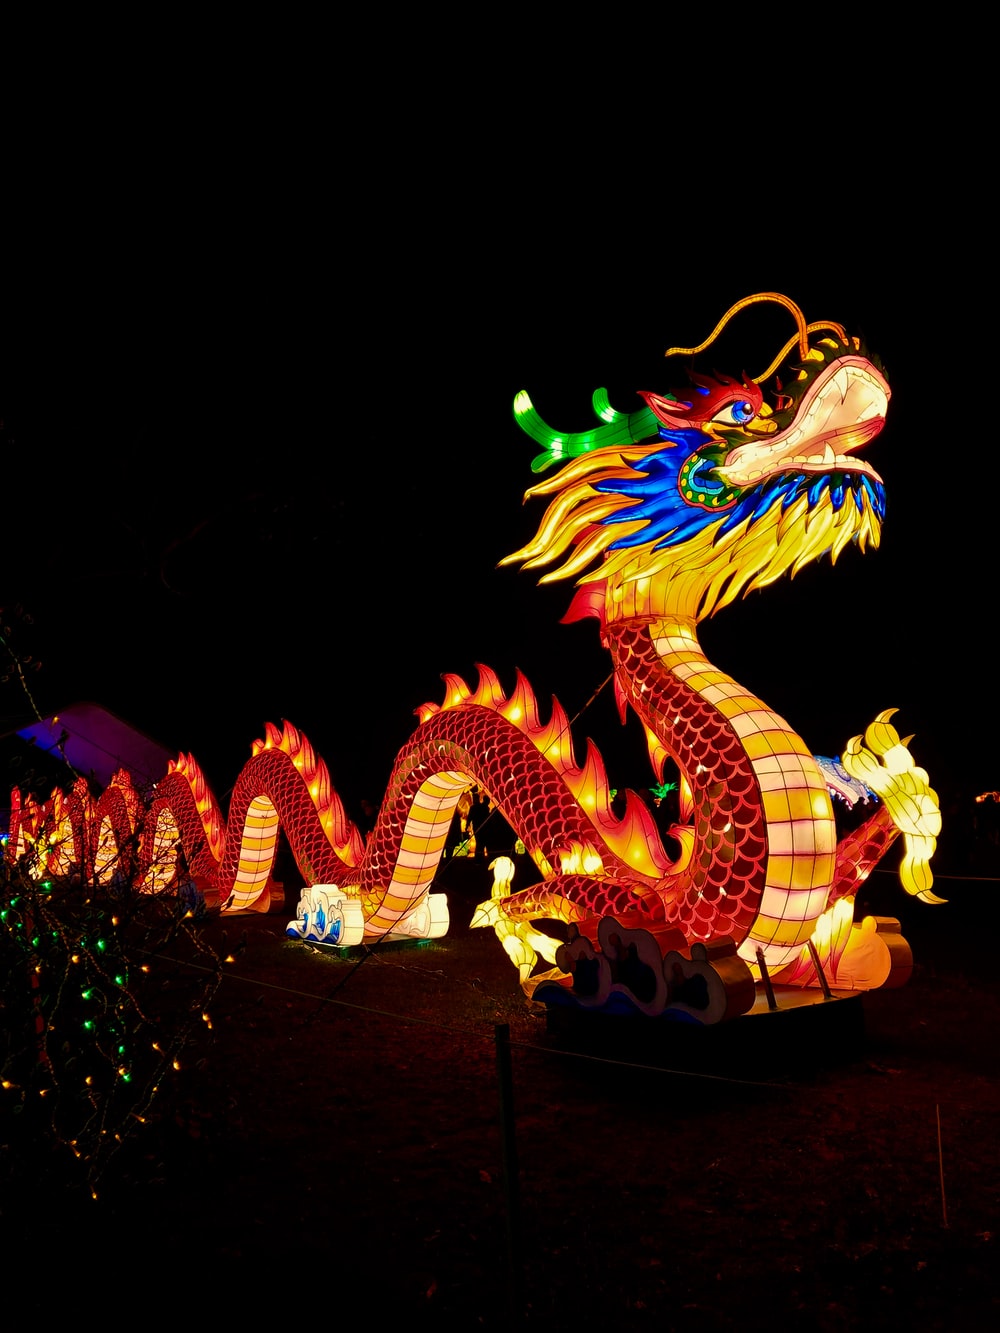 Chinese Dragon Picture. Download Free Image